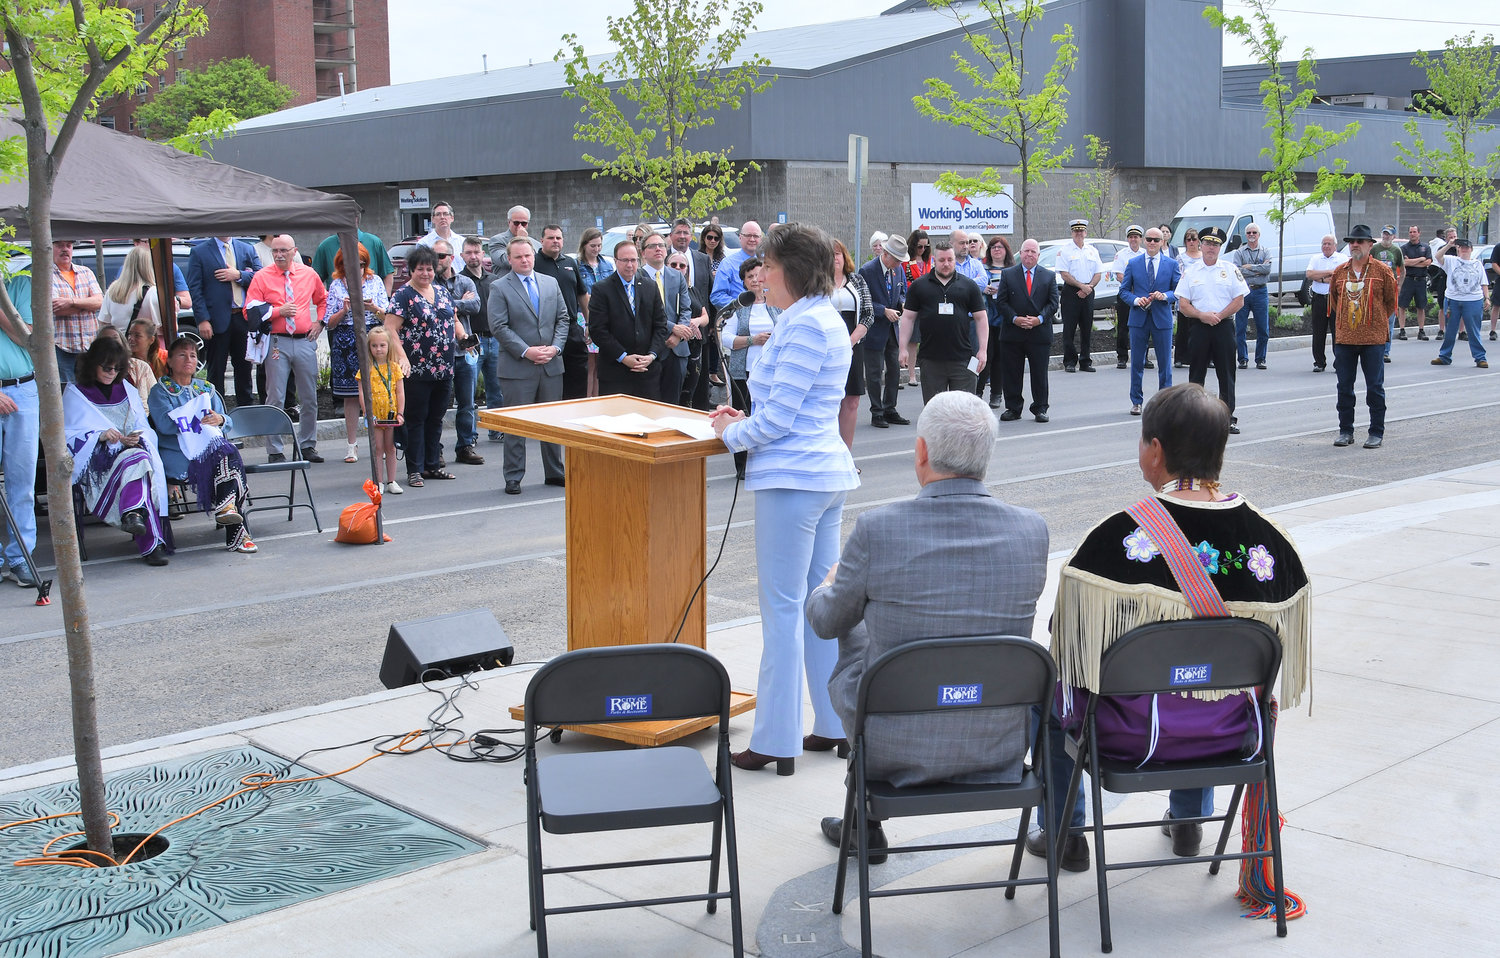 UNVEILING CEREMONY — Rome Mayor Jacqueline M. Izzo addresses the crowd gathered for the official unveiling ceremony of the new Oneida Nation monument located outside 301 W. Dominick St. Tuesday morning.